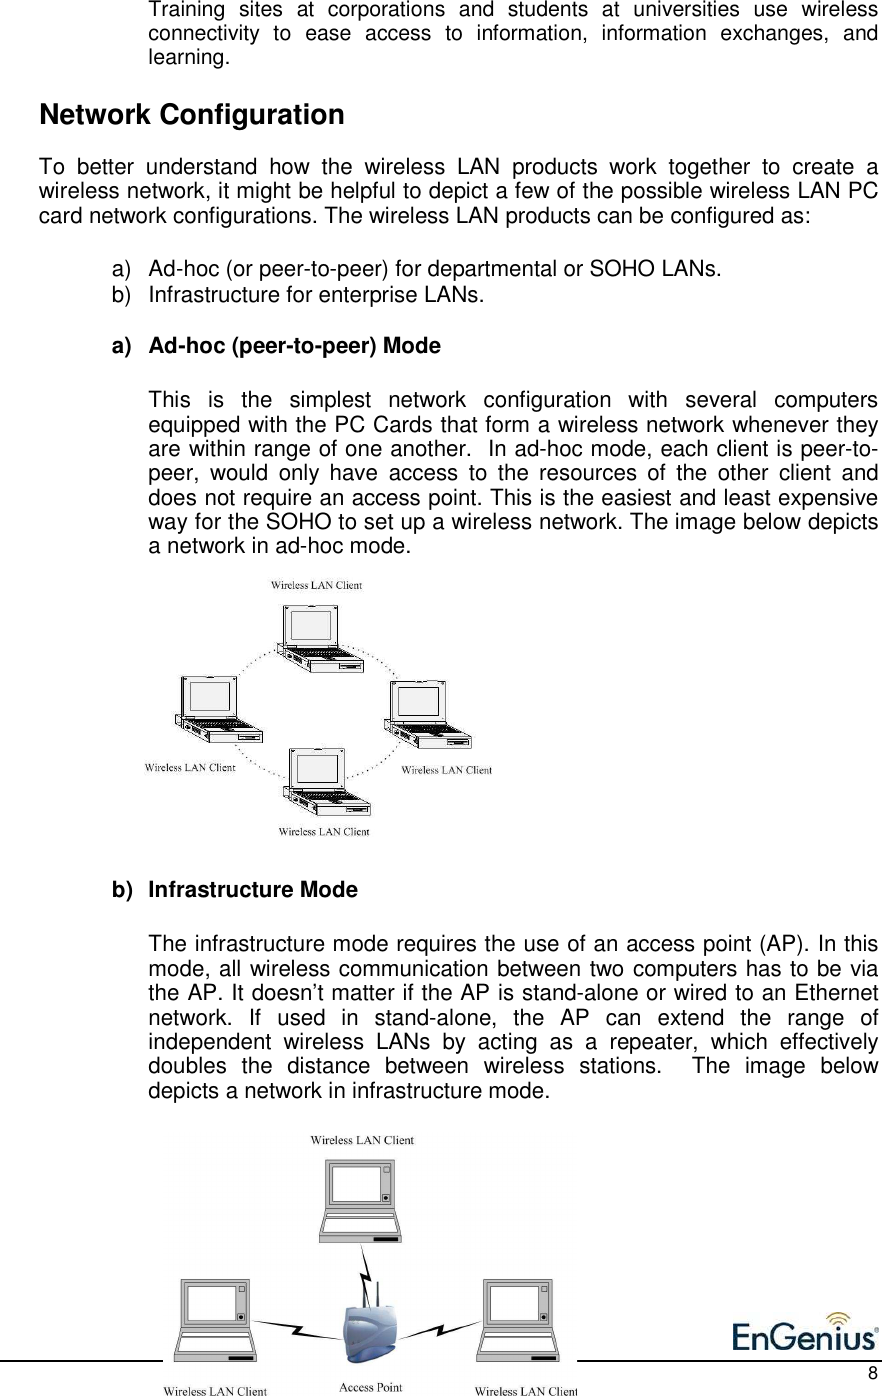    8 Training  sites  at  corporations  and  students  at  universities  use  wireless connectivity  to  ease  access  to  information,  information  exchanges,  and learning.    Network Configuration To  better  understand  how  the  wireless  LAN  products  work  together  to  create  a wireless network, it might be helpful to depict a few of the possible wireless LAN PC card network configurations. The wireless LAN products can be configured as:  a)  Ad-hoc (or peer-to-peer) for departmental or SOHO LANs. b)  Infrastructure for enterprise LANs.  a)  Ad-hoc (peer-to-peer) Mode  This  is  the  simplest  network  configuration  with  several  computers equipped with the PC Cards that form a wireless network whenever they are within range of one another.  In ad-hoc mode, each client is peer-to-peer,  would  only  have  access  to  the  resources  of  the  other  client  and does not require an access point. This is the easiest and least expensive way for the SOHO to set up a wireless network. The image below depicts a network in ad-hoc mode.             b)  Infrastructure Mode  The infrastructure mode requires the use of an access point (AP). In this mode, all wireless communication between two computers has to be via the AP. It doesn’t matter if the AP is stand-alone or wired to an Ethernet network.  If  used  in  stand-alone,  the  AP  can  extend  the  range  of independent  wireless  LANs  by  acting  as  a  repeater,  which  effectively doubles  the  distance  between  wireless  stations.    The  image  below depicts a network in infrastructure mode.          